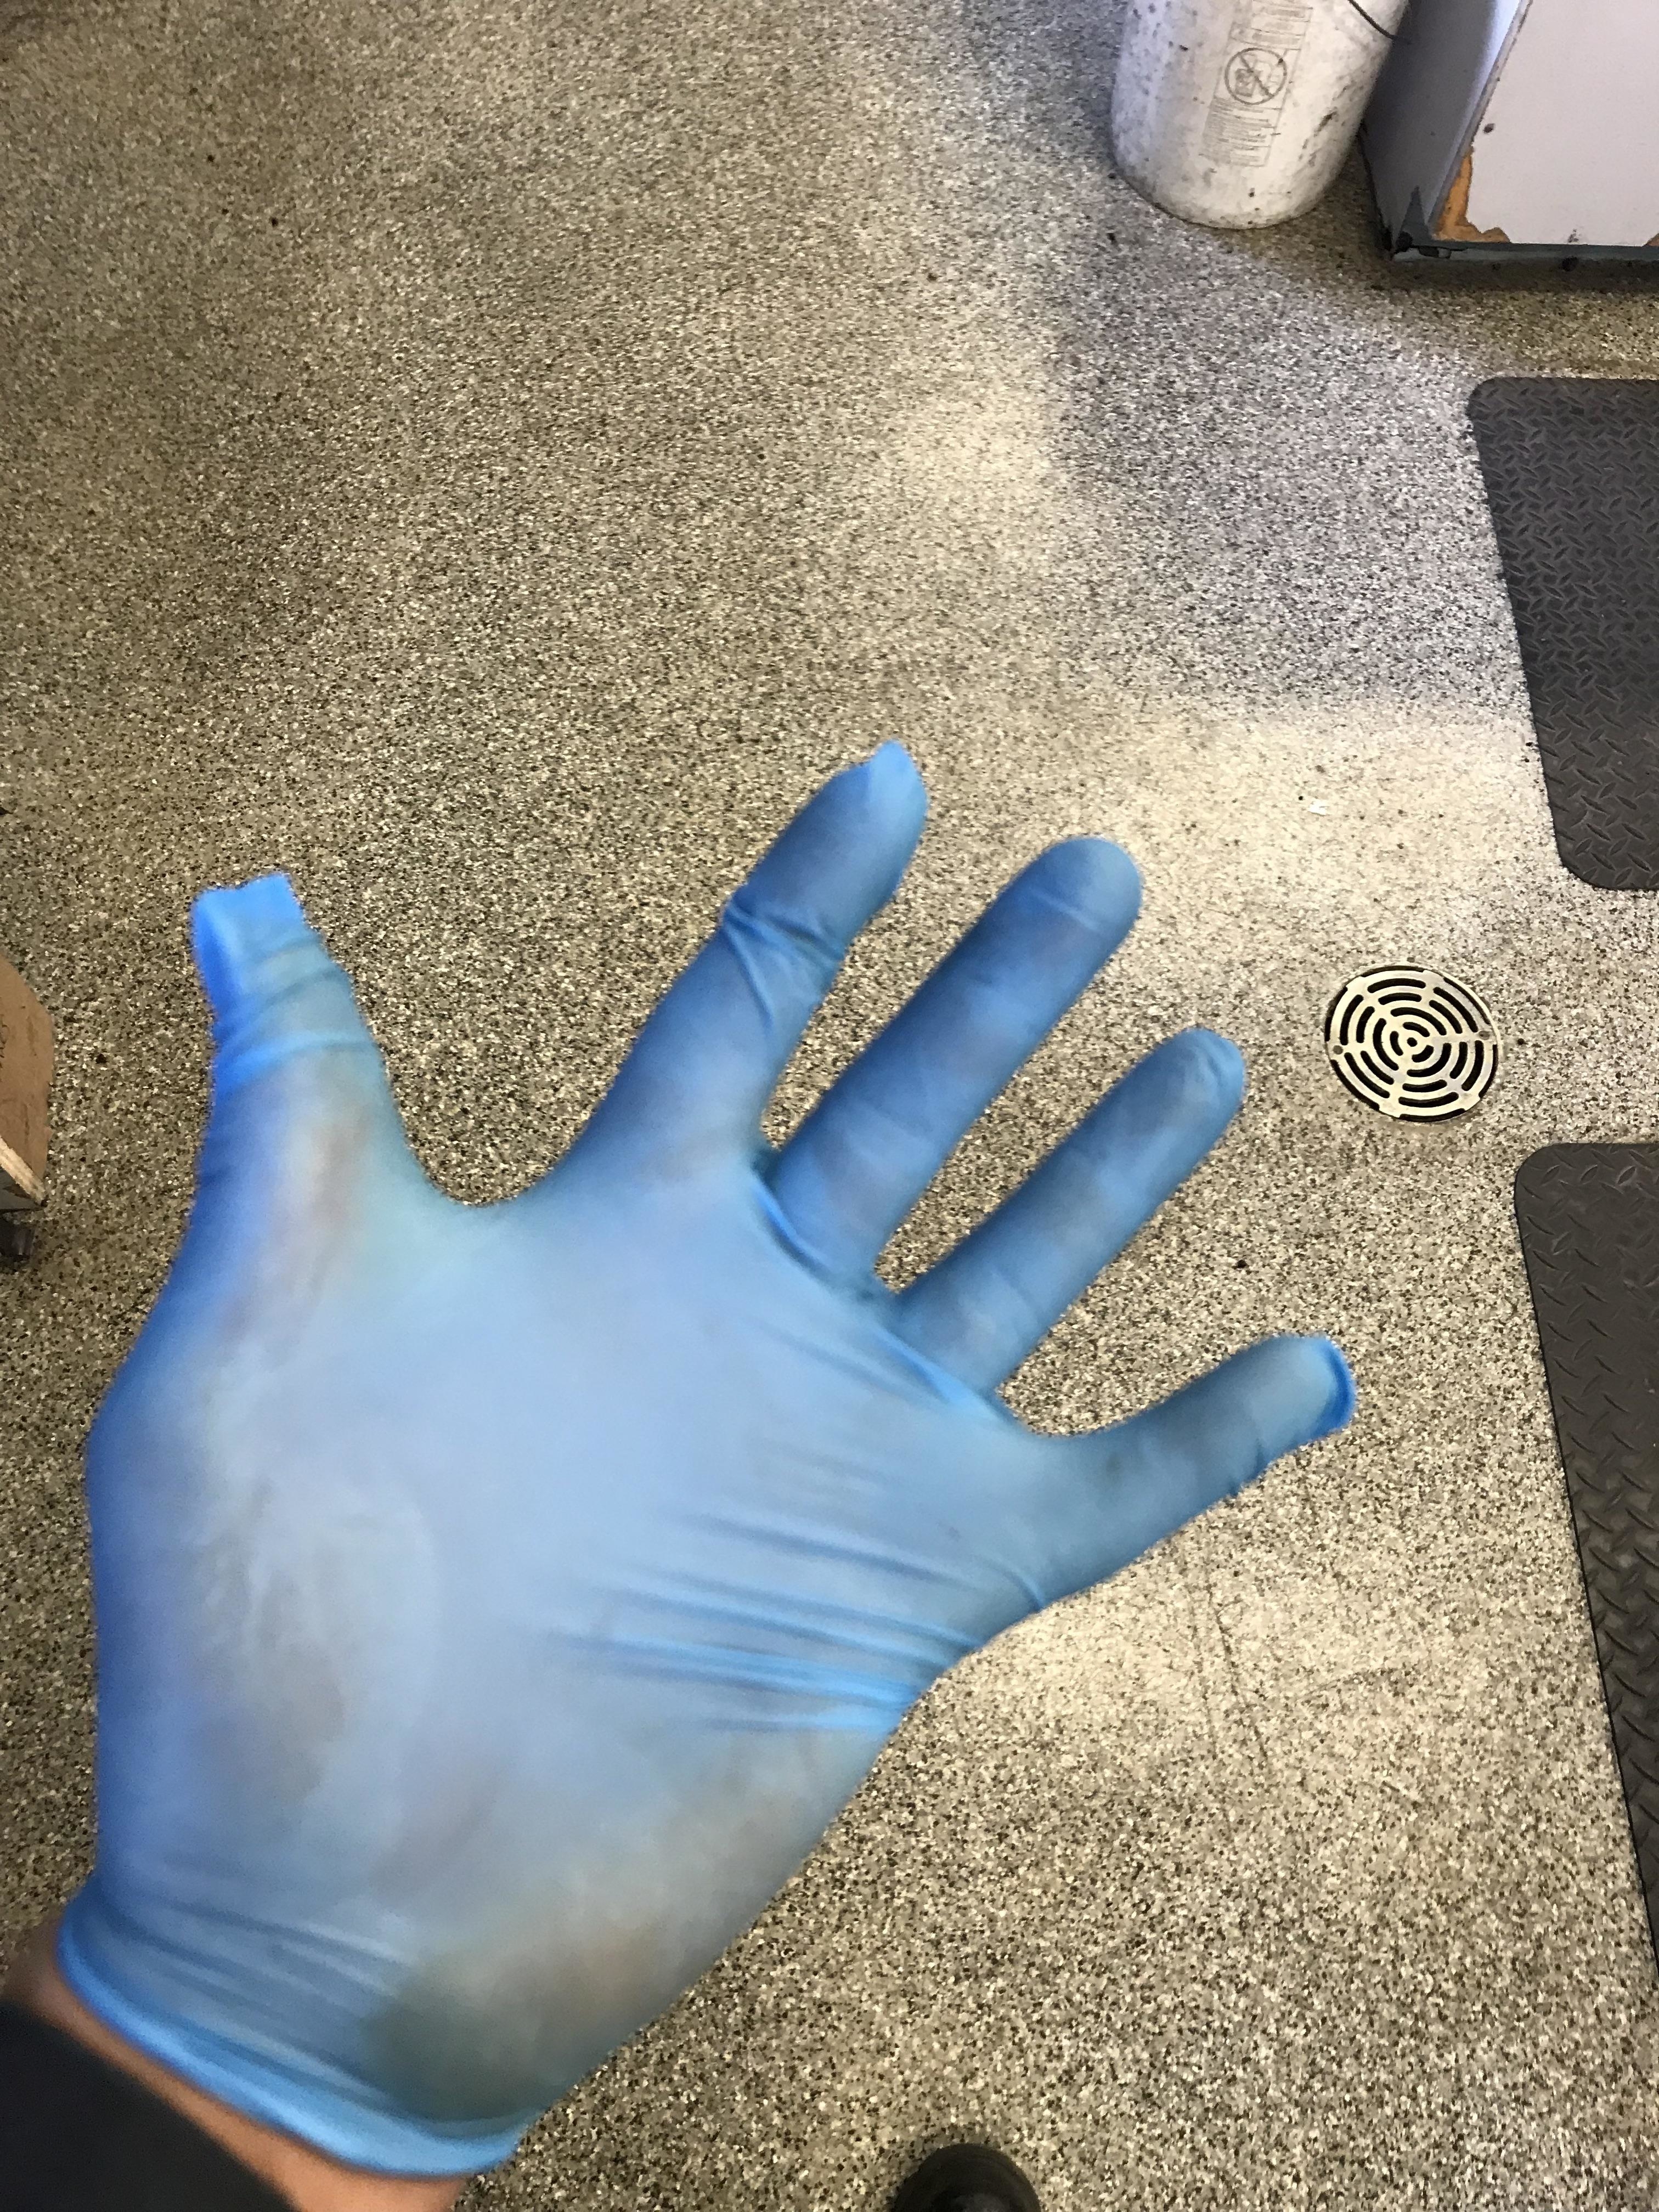 An employee wearing rubber gloves that are clearly too small